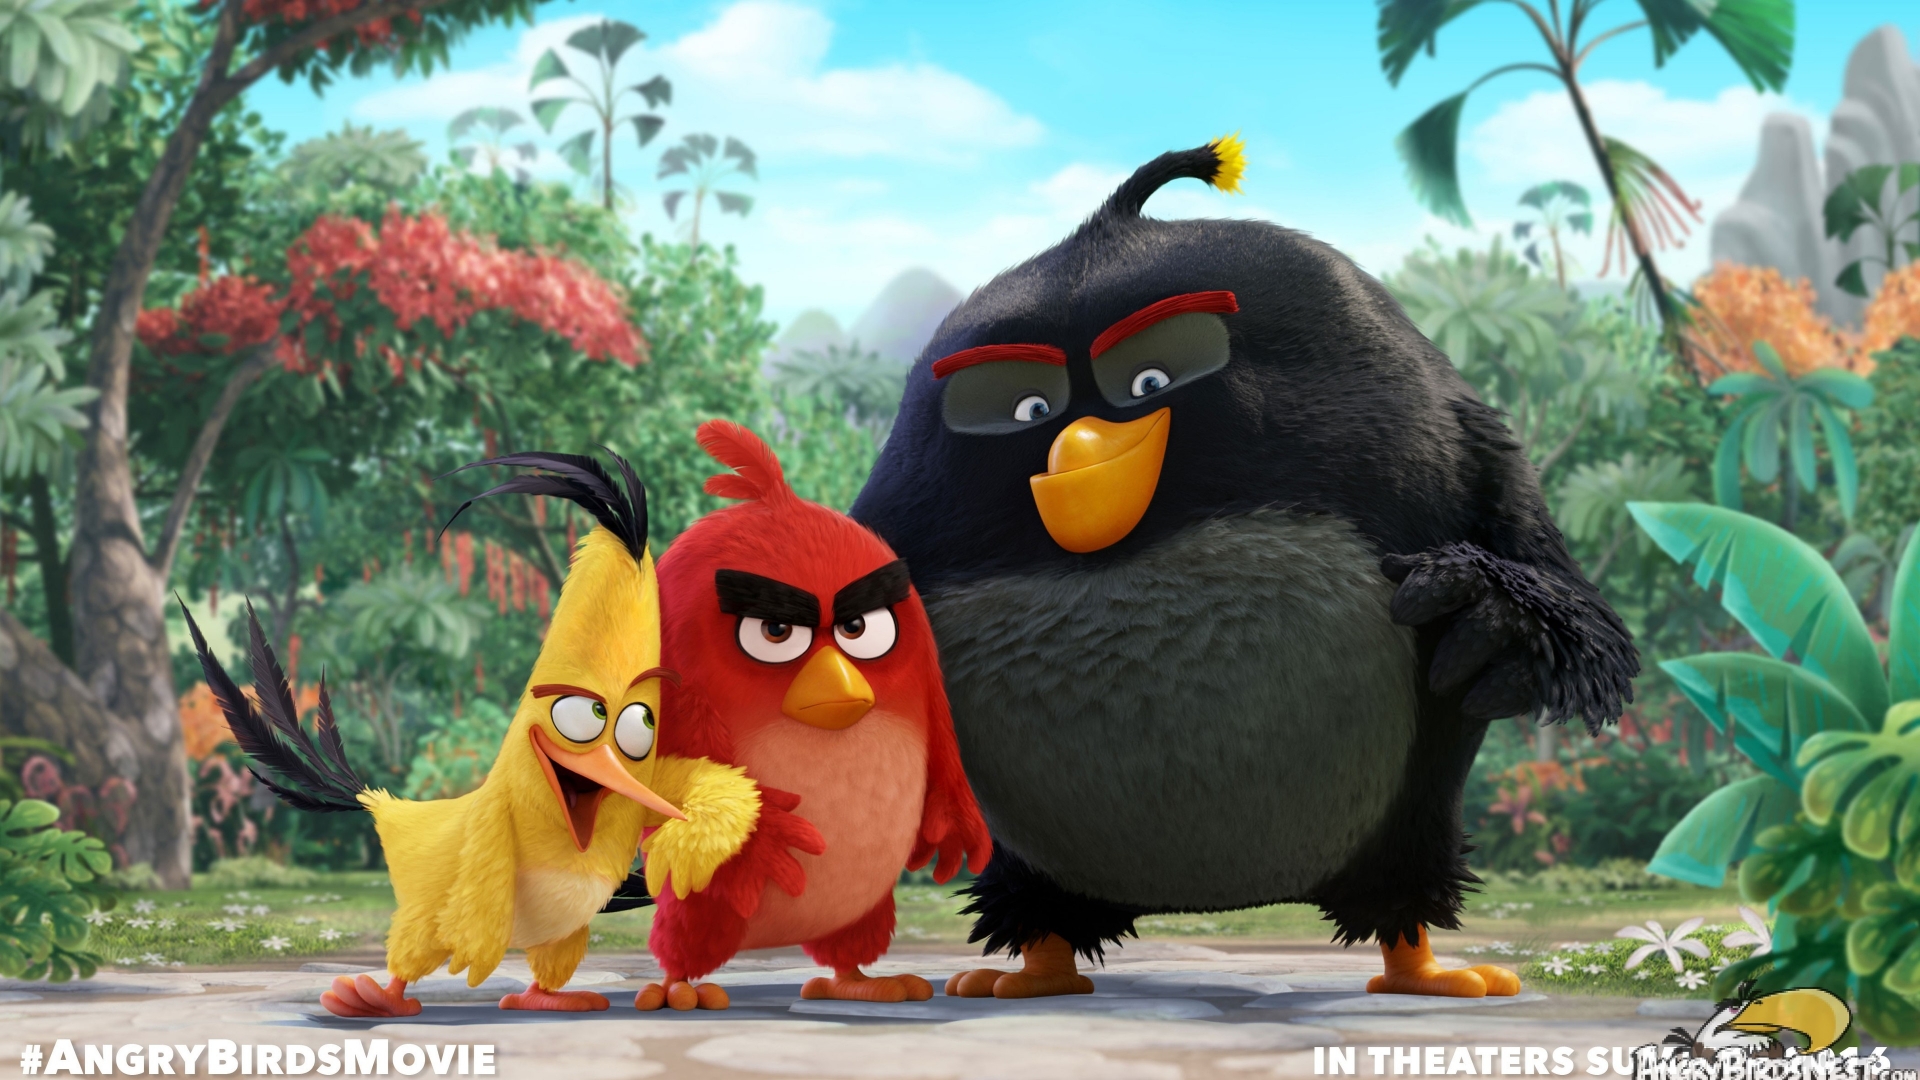 Angry Birds Movie for 1920 x 1080 HDTV 1080p resolution